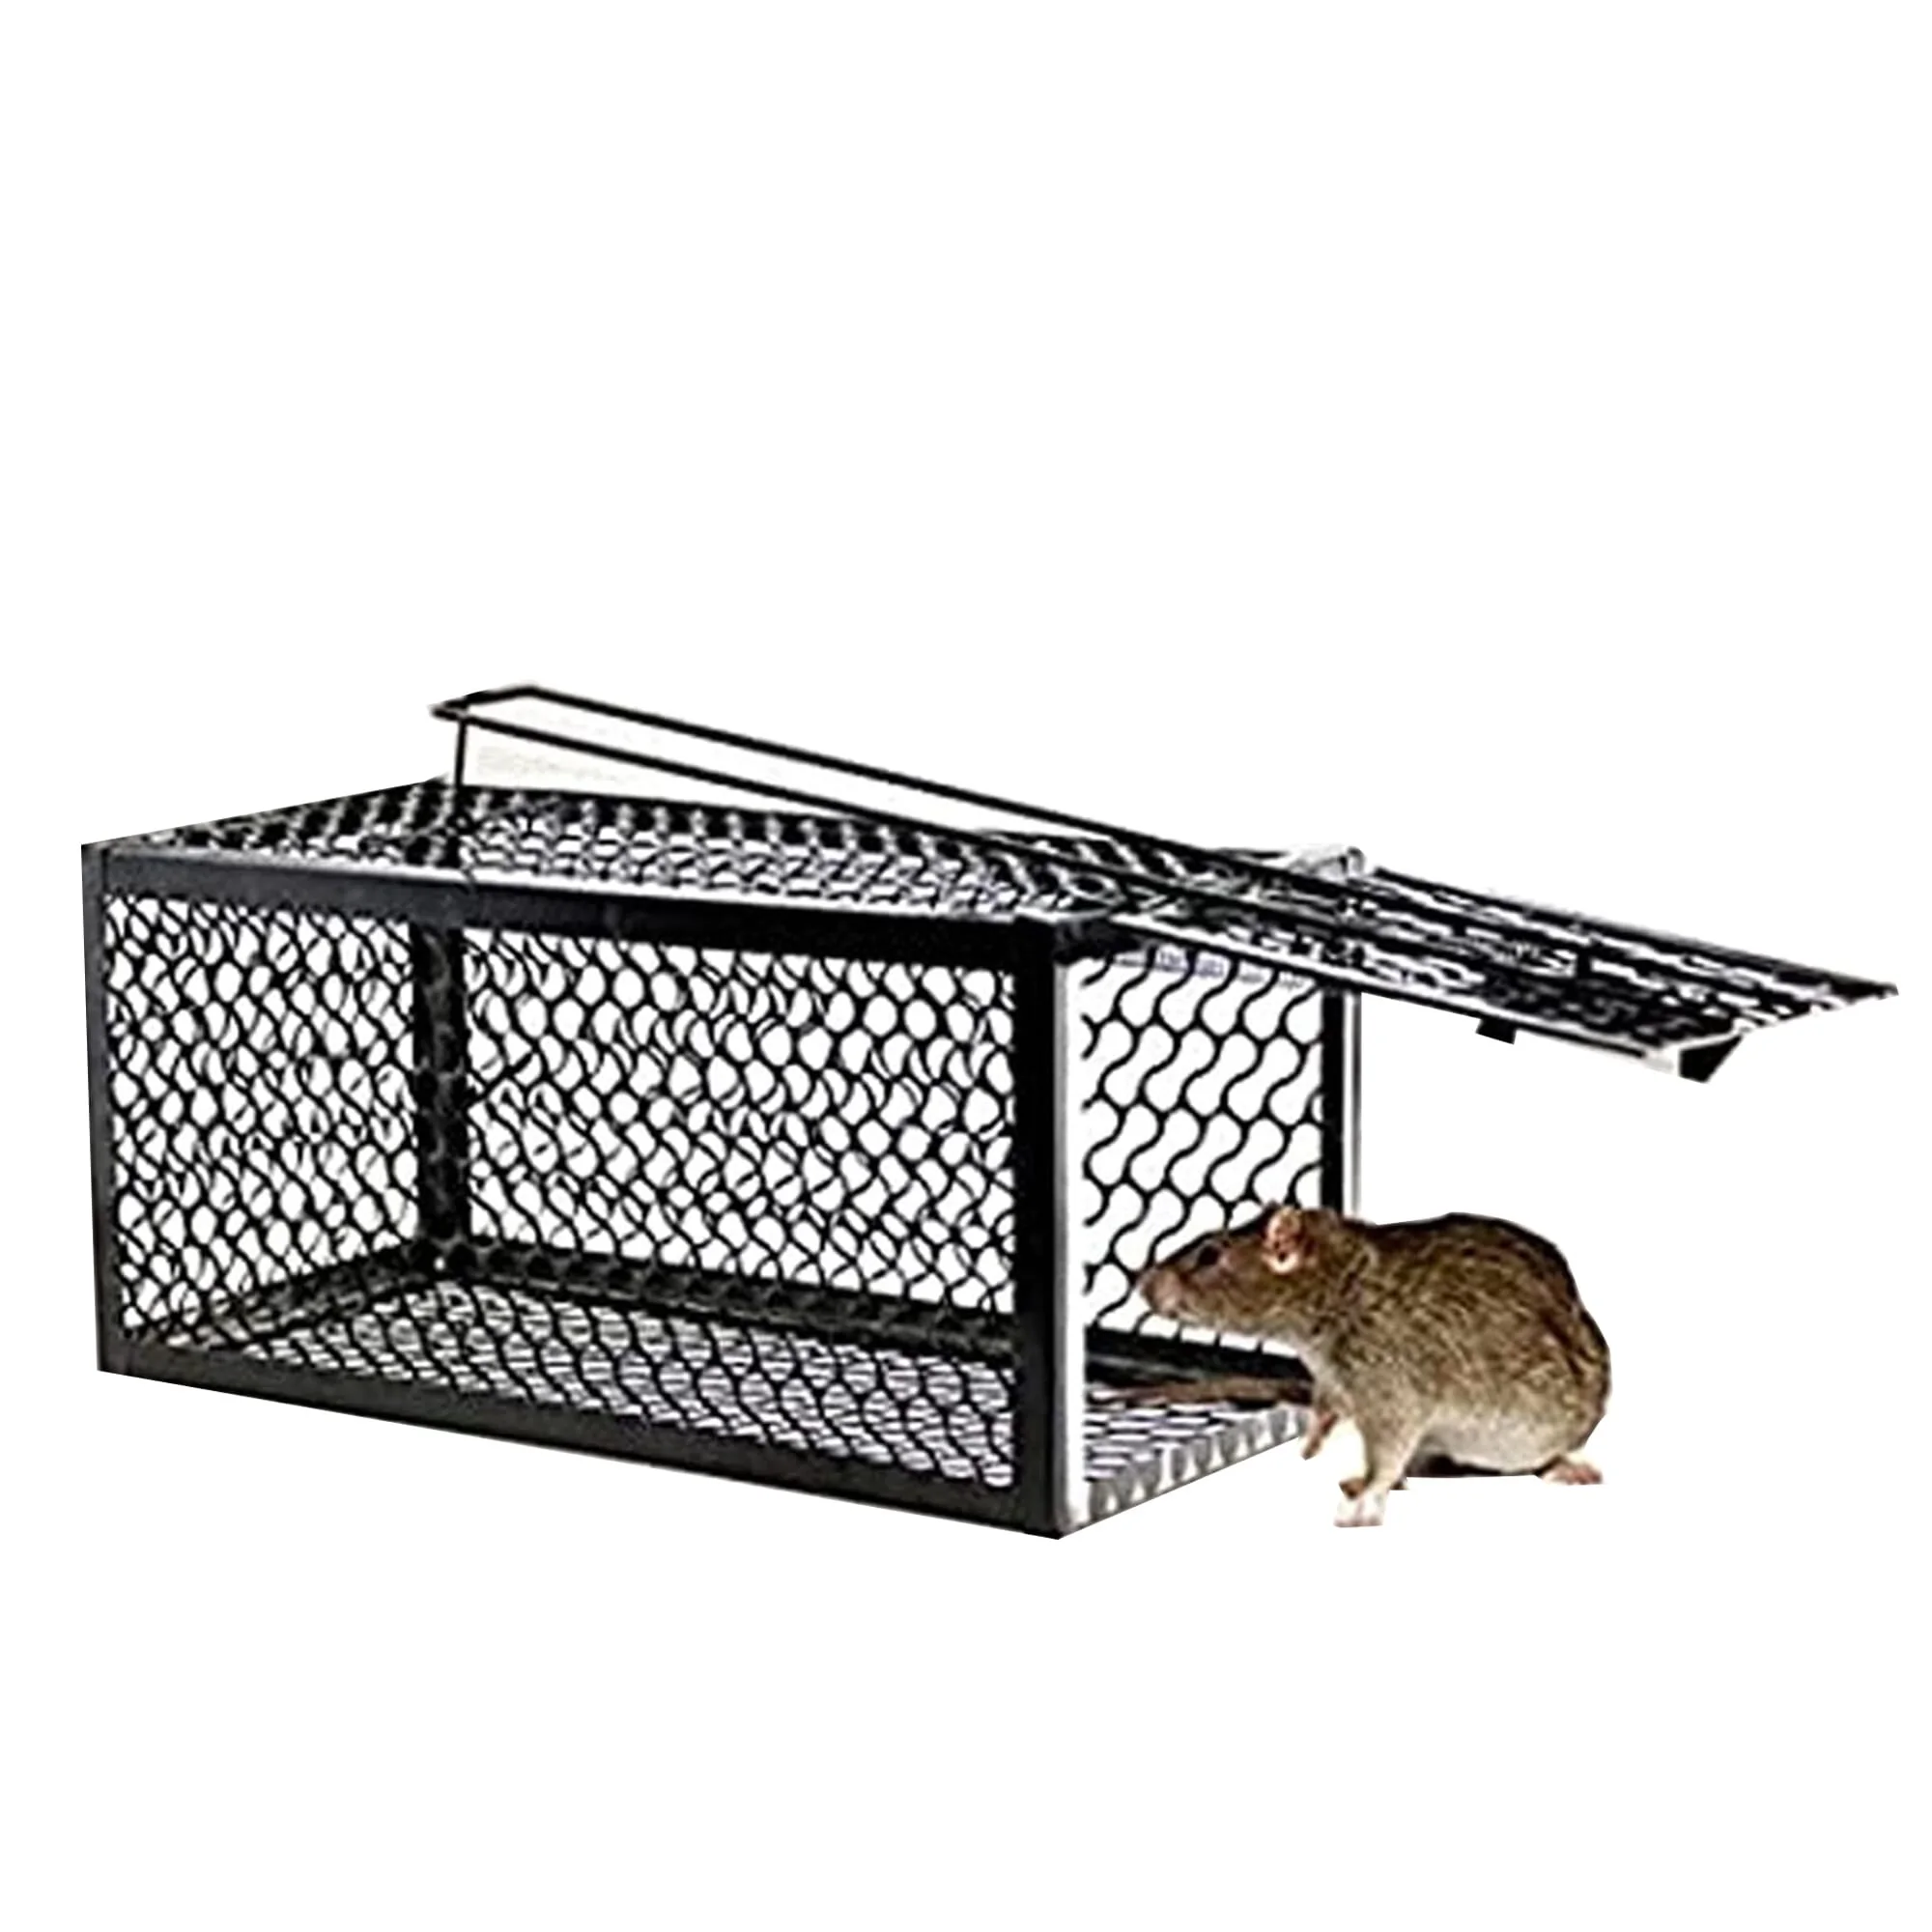  Kittmip 6 Pieces Humane Rat Trap Chipmunk Rodent Traps 10.6 x  5 x 5 Inch Small Mouse Trap Squirrel Trap No Kill Animal Trap Live Rat Trap  for Indoor Outdoor